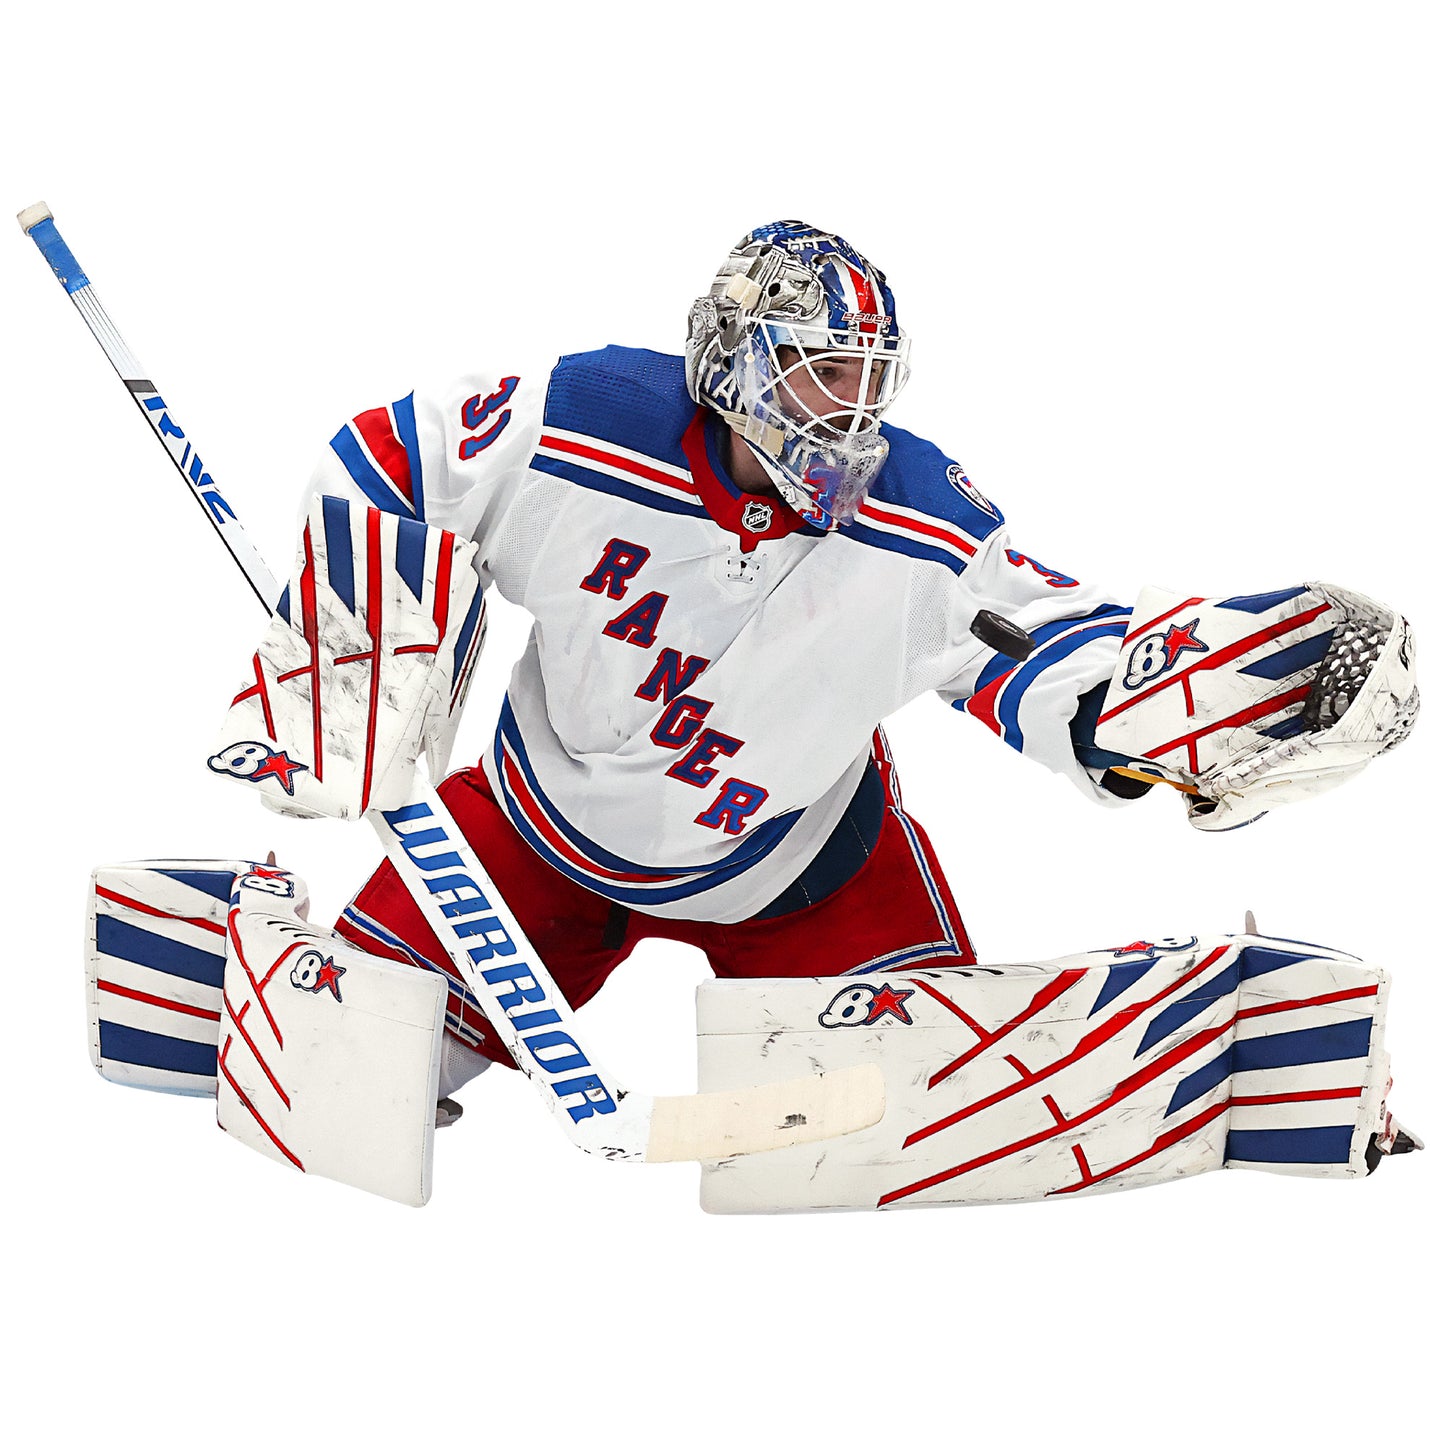 New York Rangers: Igor Shesterkin 2021 Poster - NHL Removable Adhesive Wall Decal Large